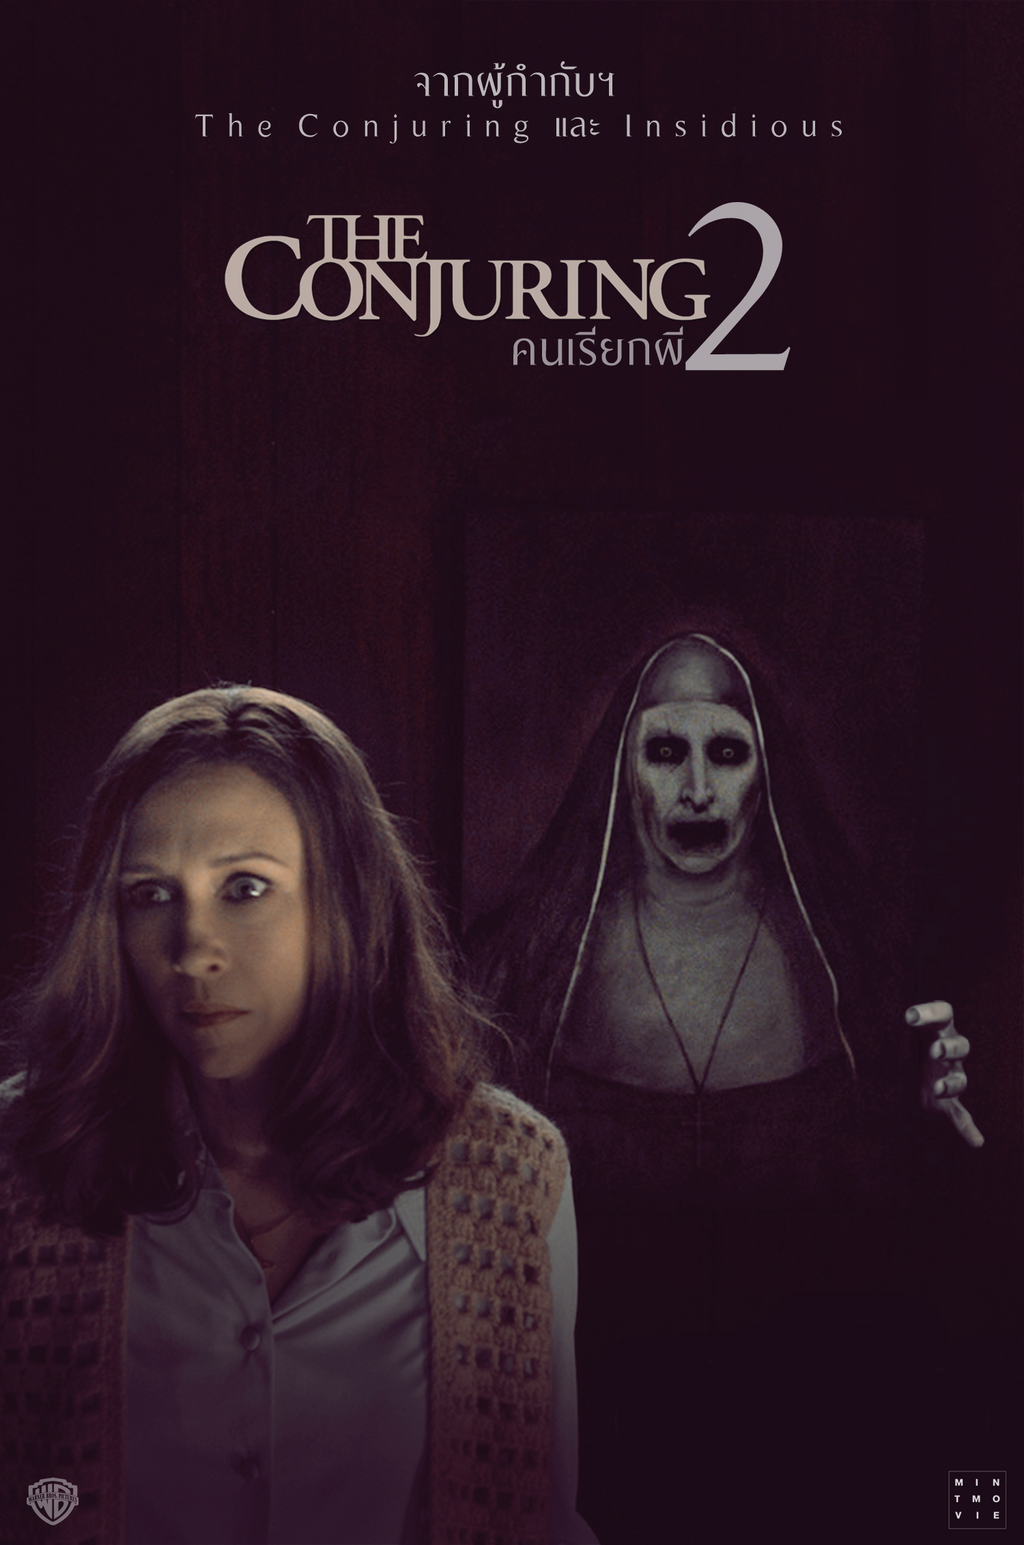 The Conjuring 2 (English) Mp3 Songs Dubbed In Hindi Free Download